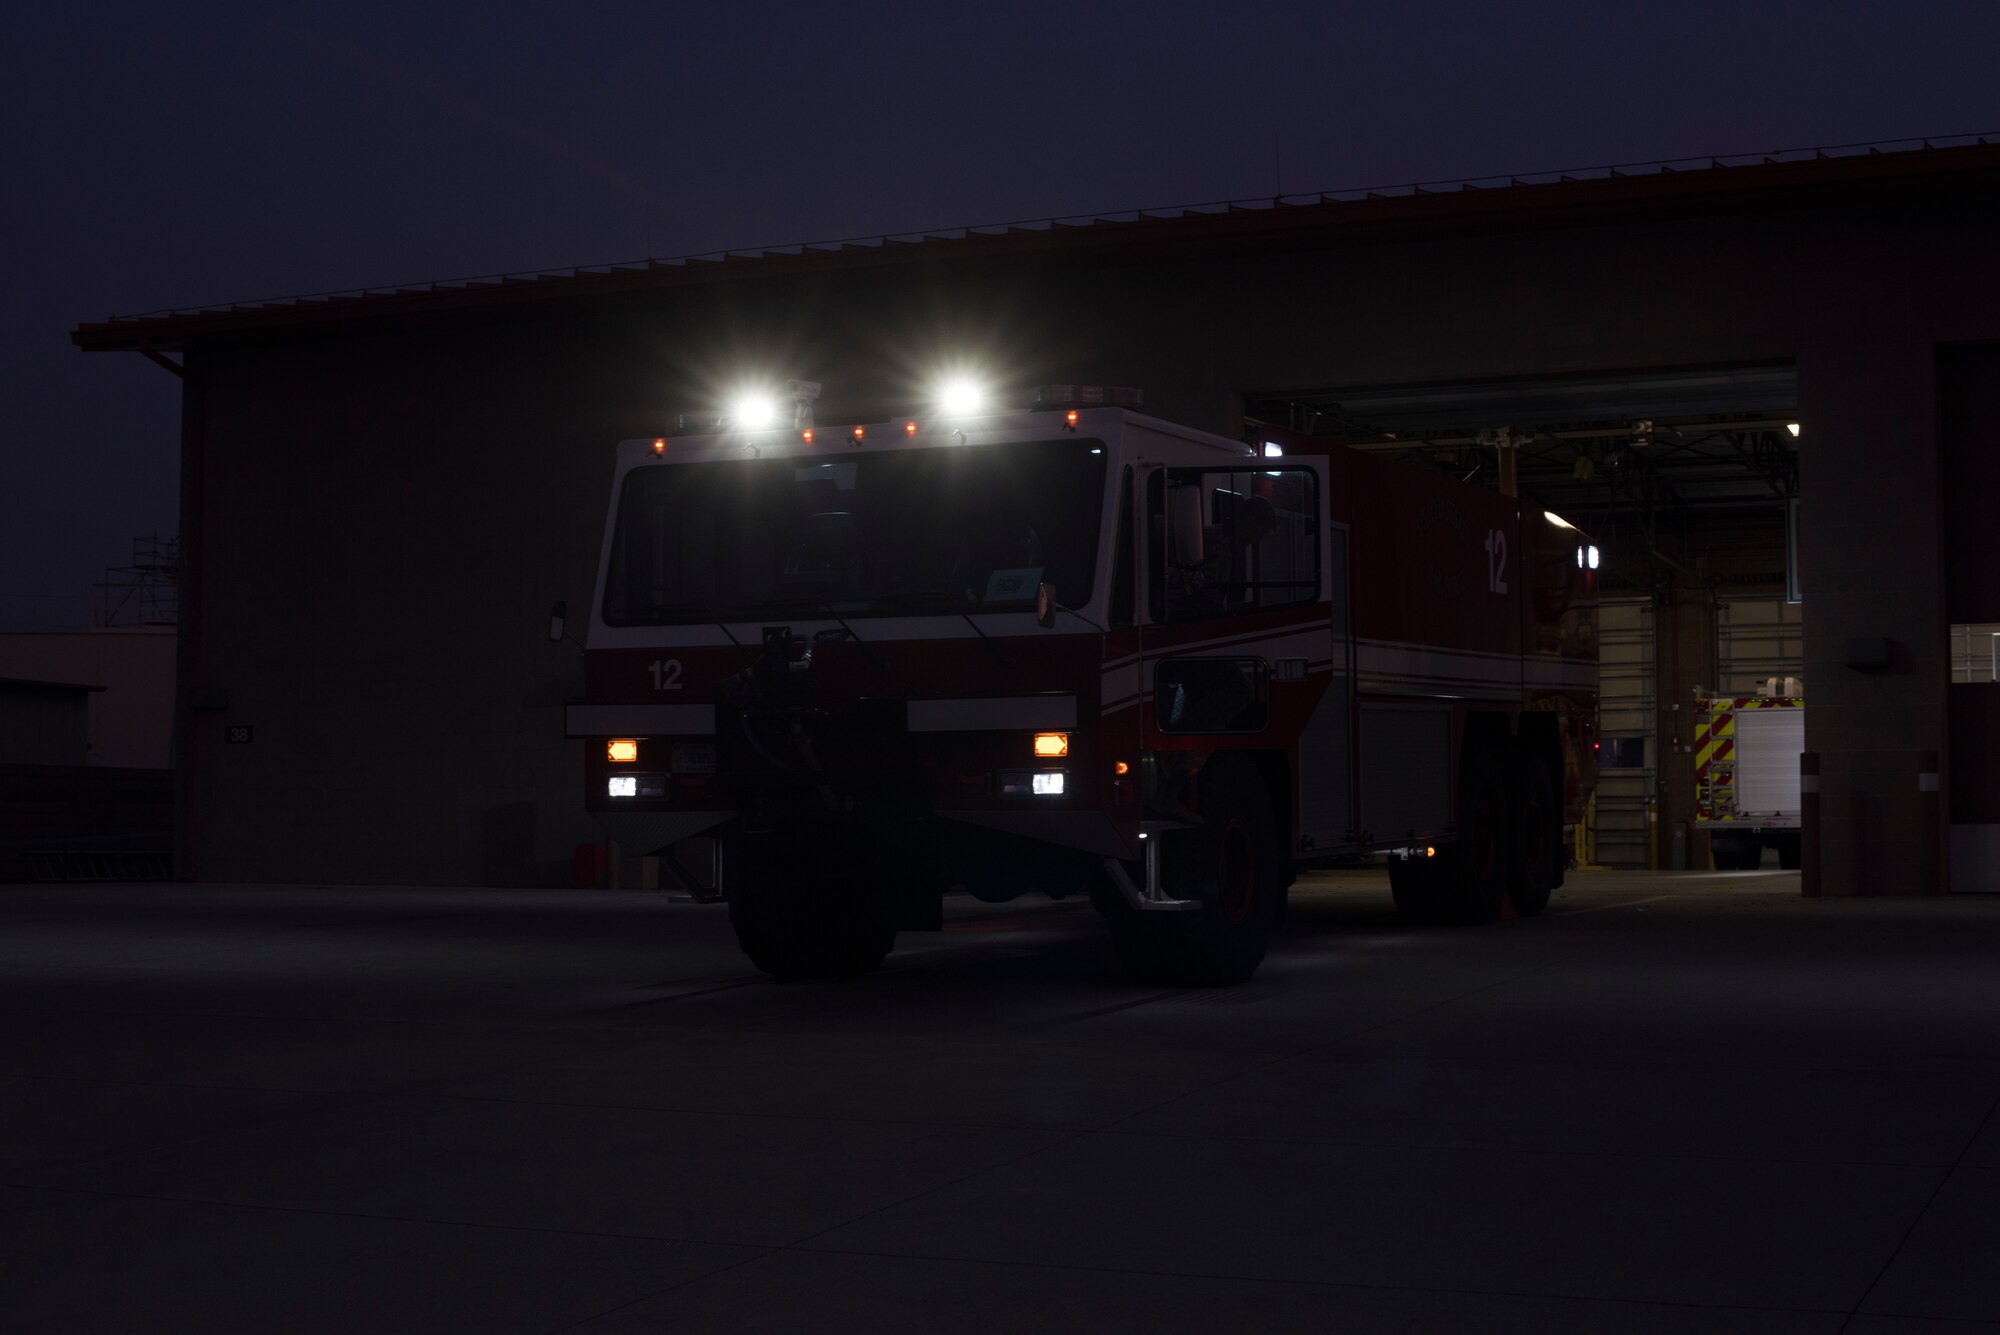 Firefighters assigned to the 60th Civil Engineer Squadron Fire and Emergency Services flight conduct vehicle checks Oct. 29, 2019, at Travis Air Force Base, California. The FES flight provides emergency response support at Travis AFB and across Solano County. (U.S. Air Force photo by Tech. Sgt. James Hodgman)